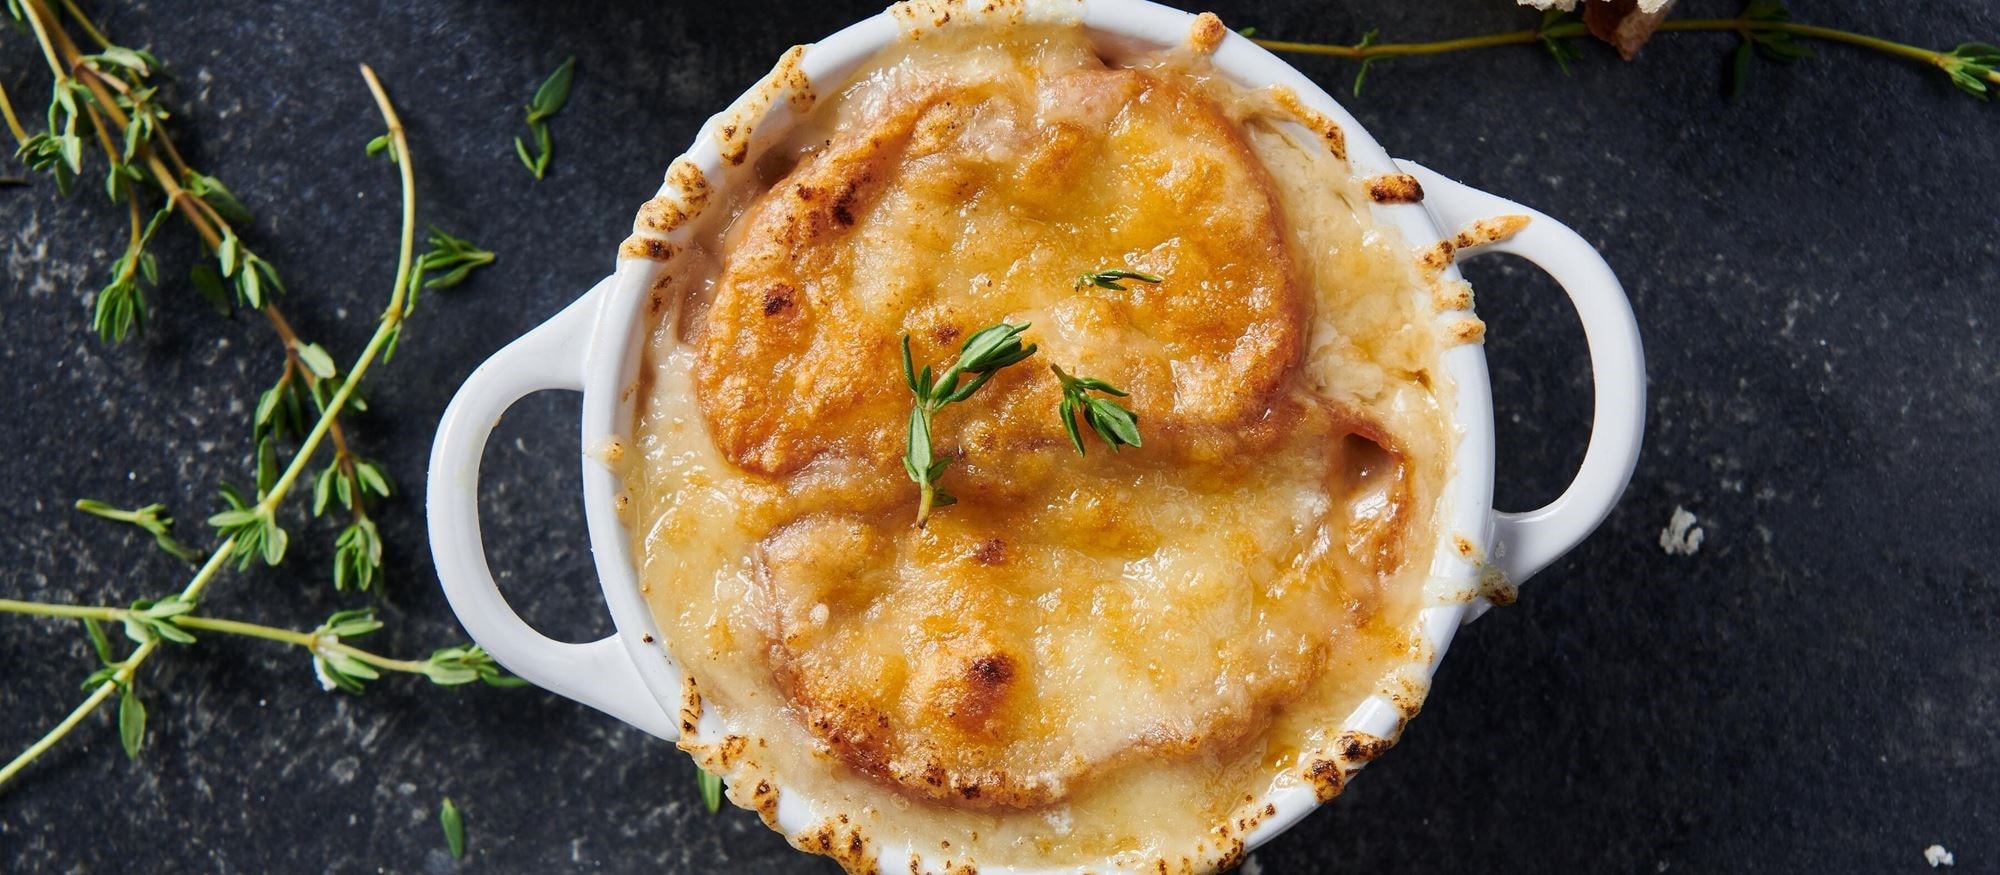 Easy and delicious French Onion Soup recipe using the French Top Mode setting of your Wolf Dual Fuel Range